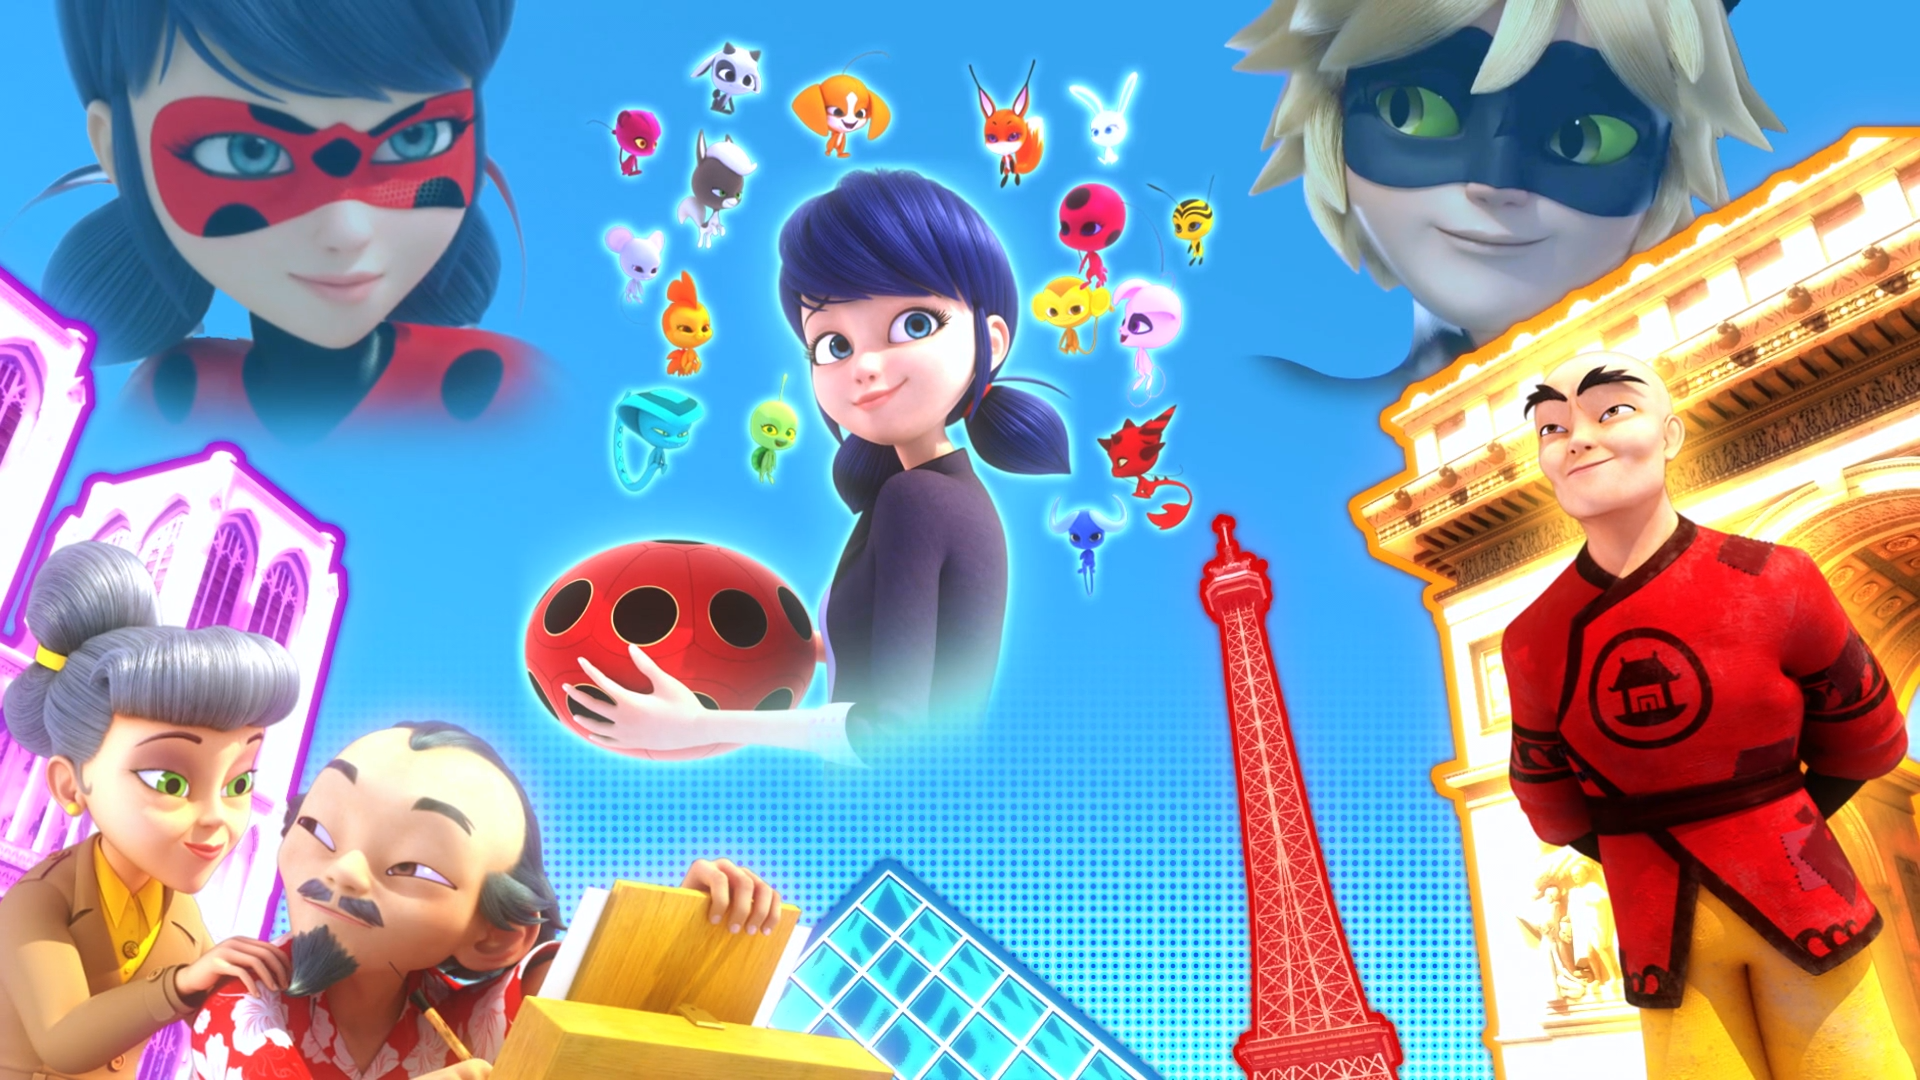 Power Players - Could Marinette and Axel be teaming up as a super team in  season 4?? 😱  just kidding! Happy April Fools - but share with us Power  Players/Miraculous Ladybug